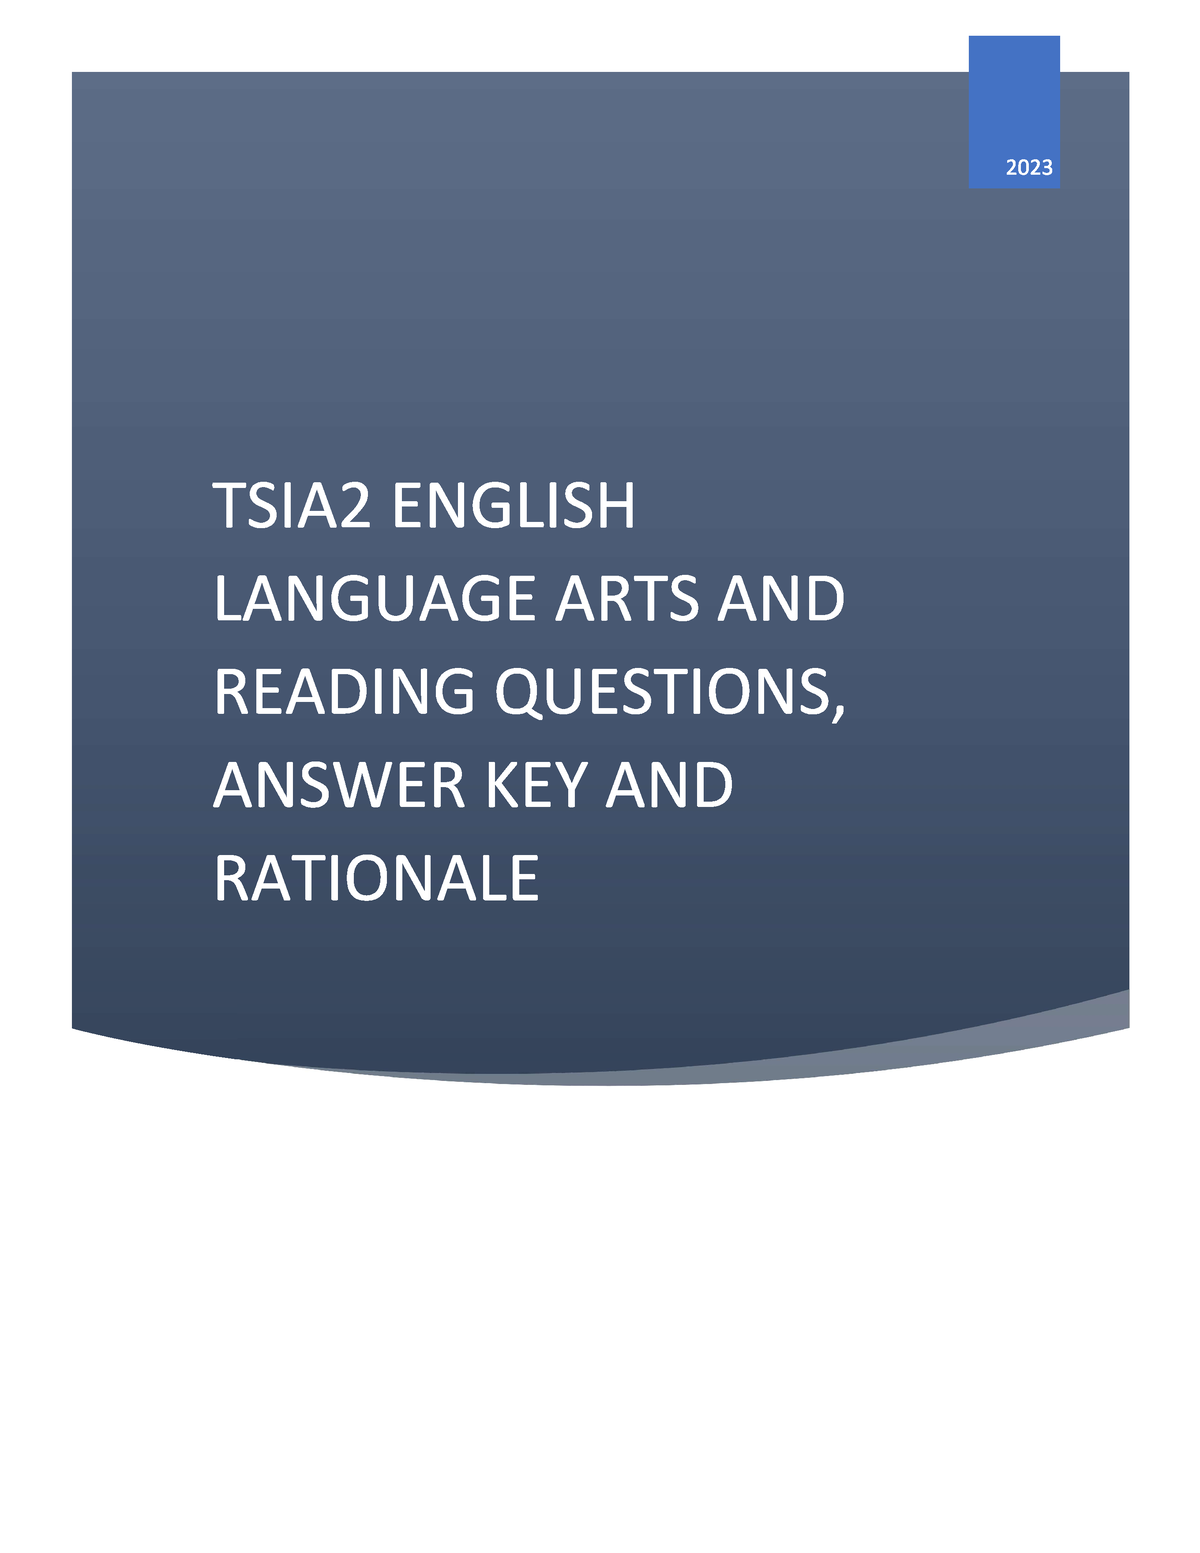 TSIA2 English Language ARTS AND Reading Questions, Answer KEY AND